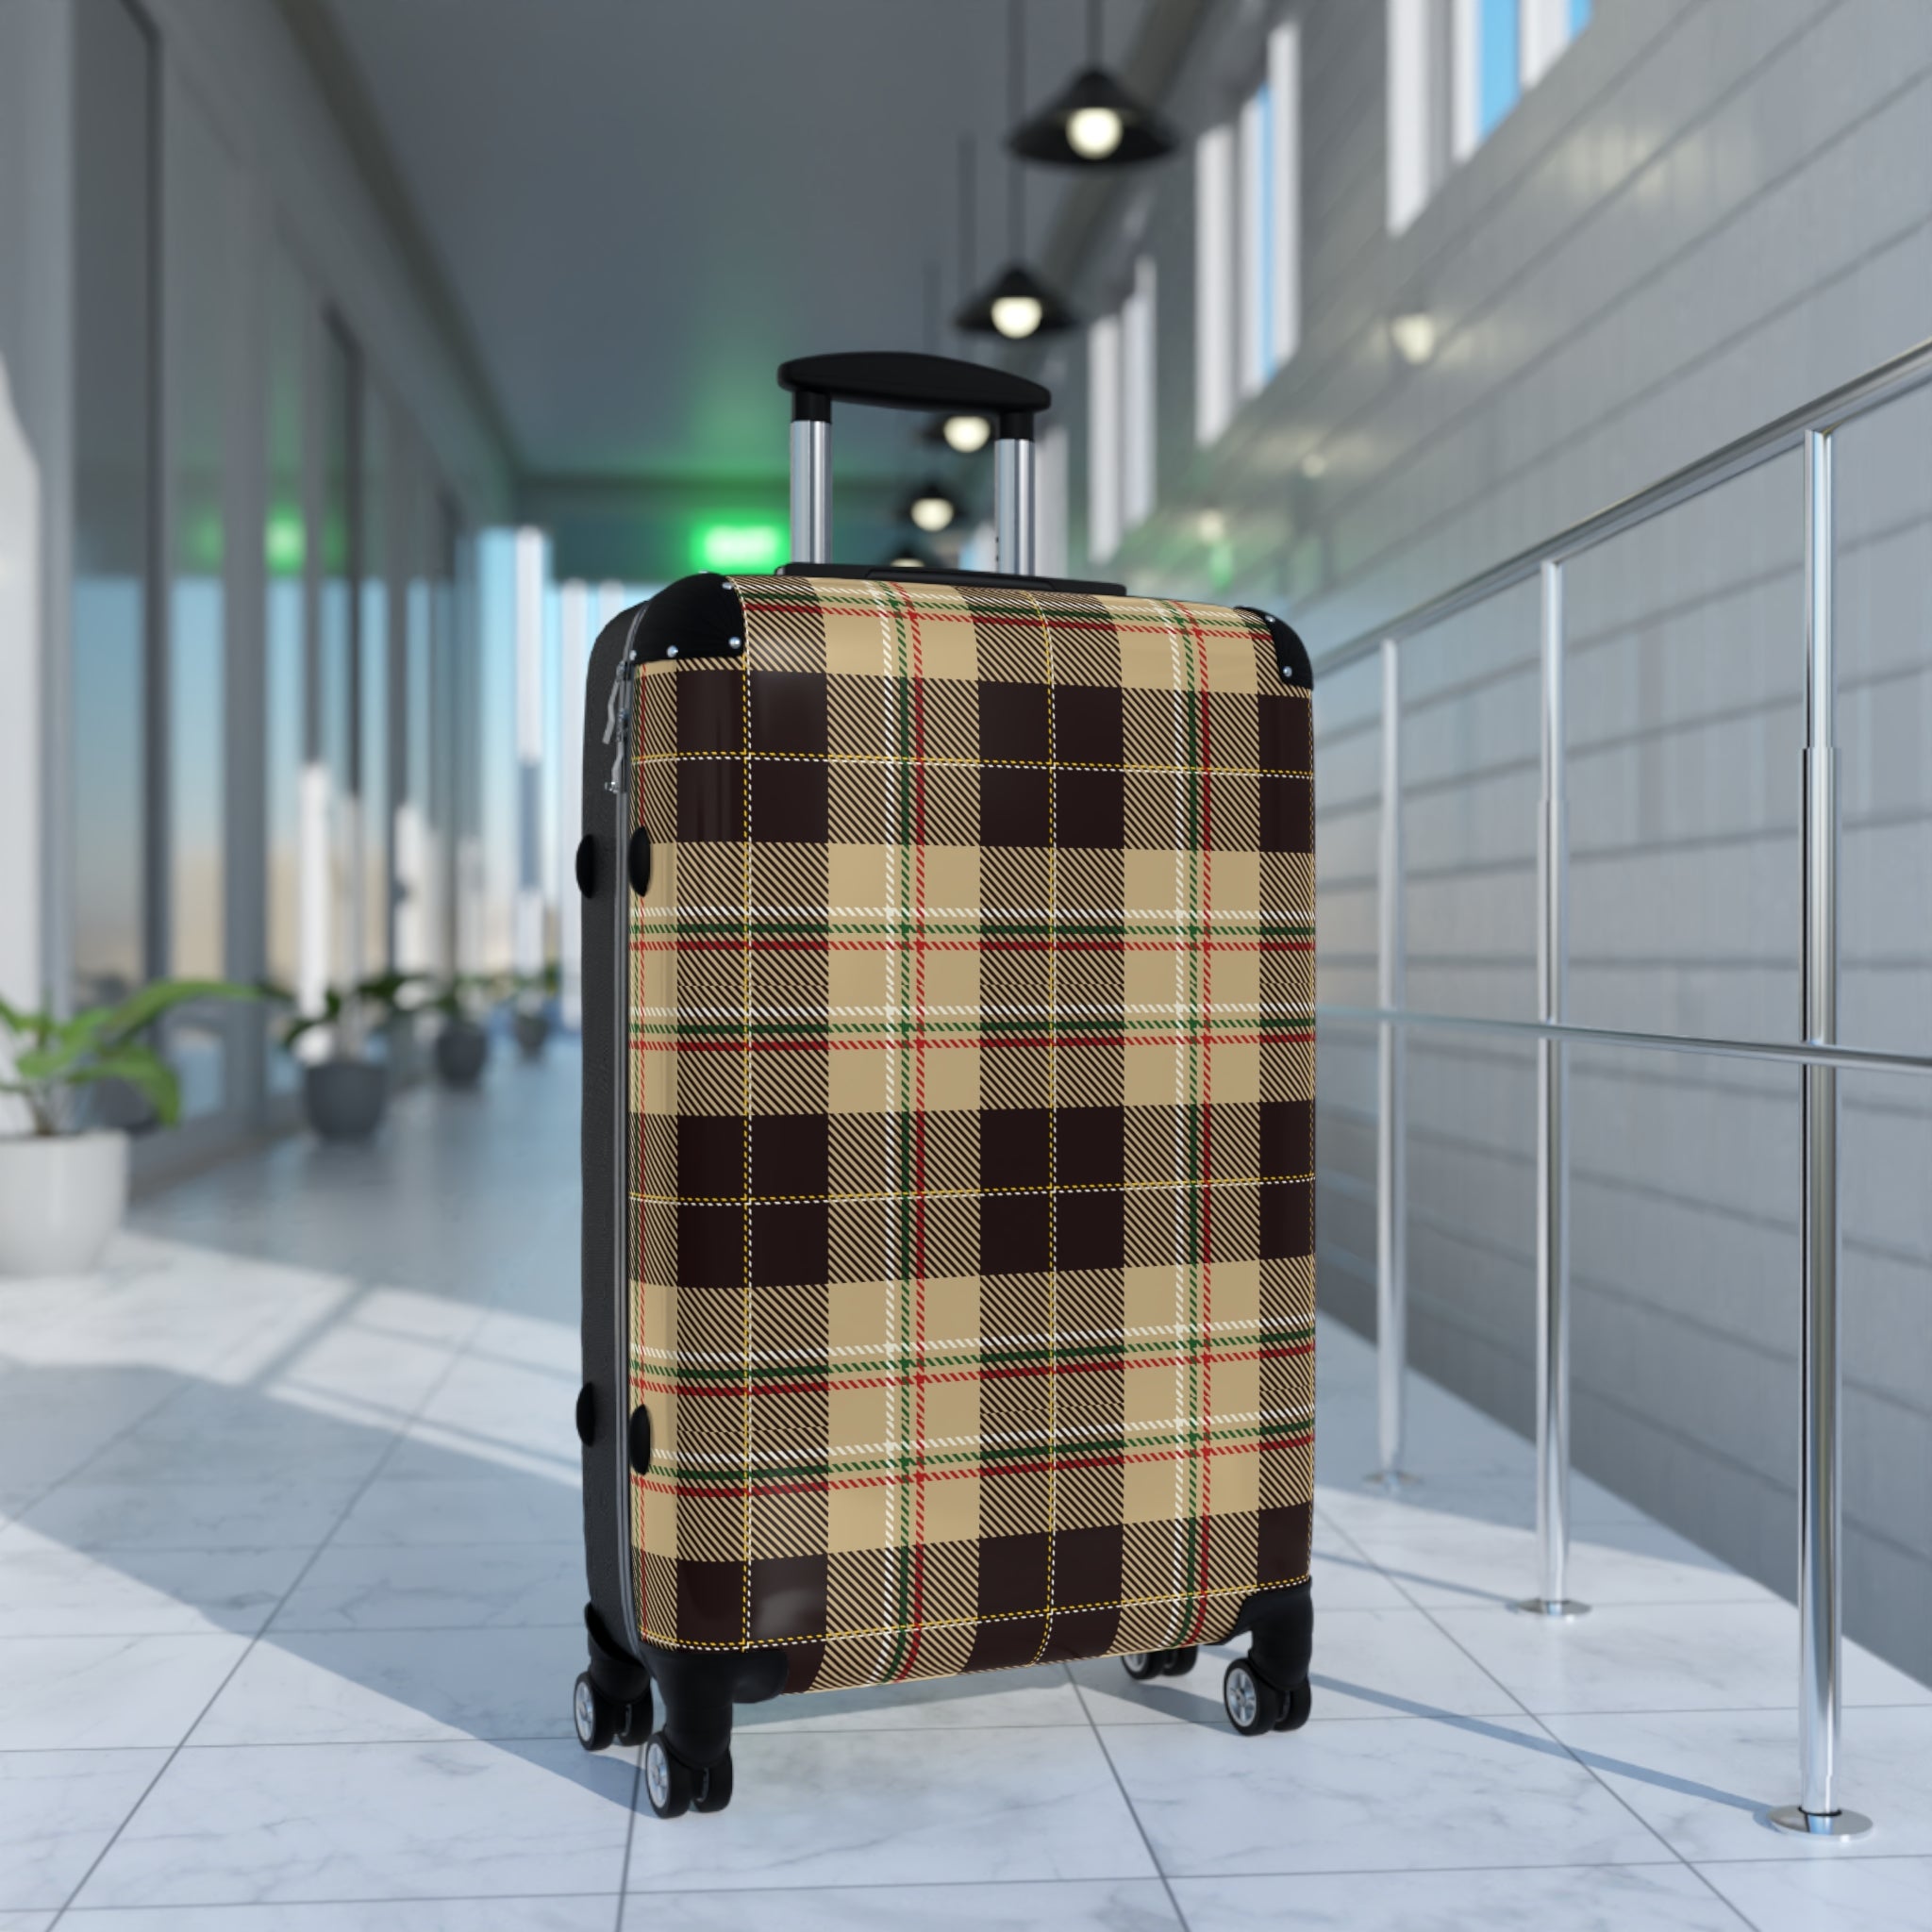 Abby Travel Collection Brown PlaidSuitcase, Hard Shell Luggage, Rolling Suitcase for Travel, Carry On Bag Bags  The Middle Aged Groove